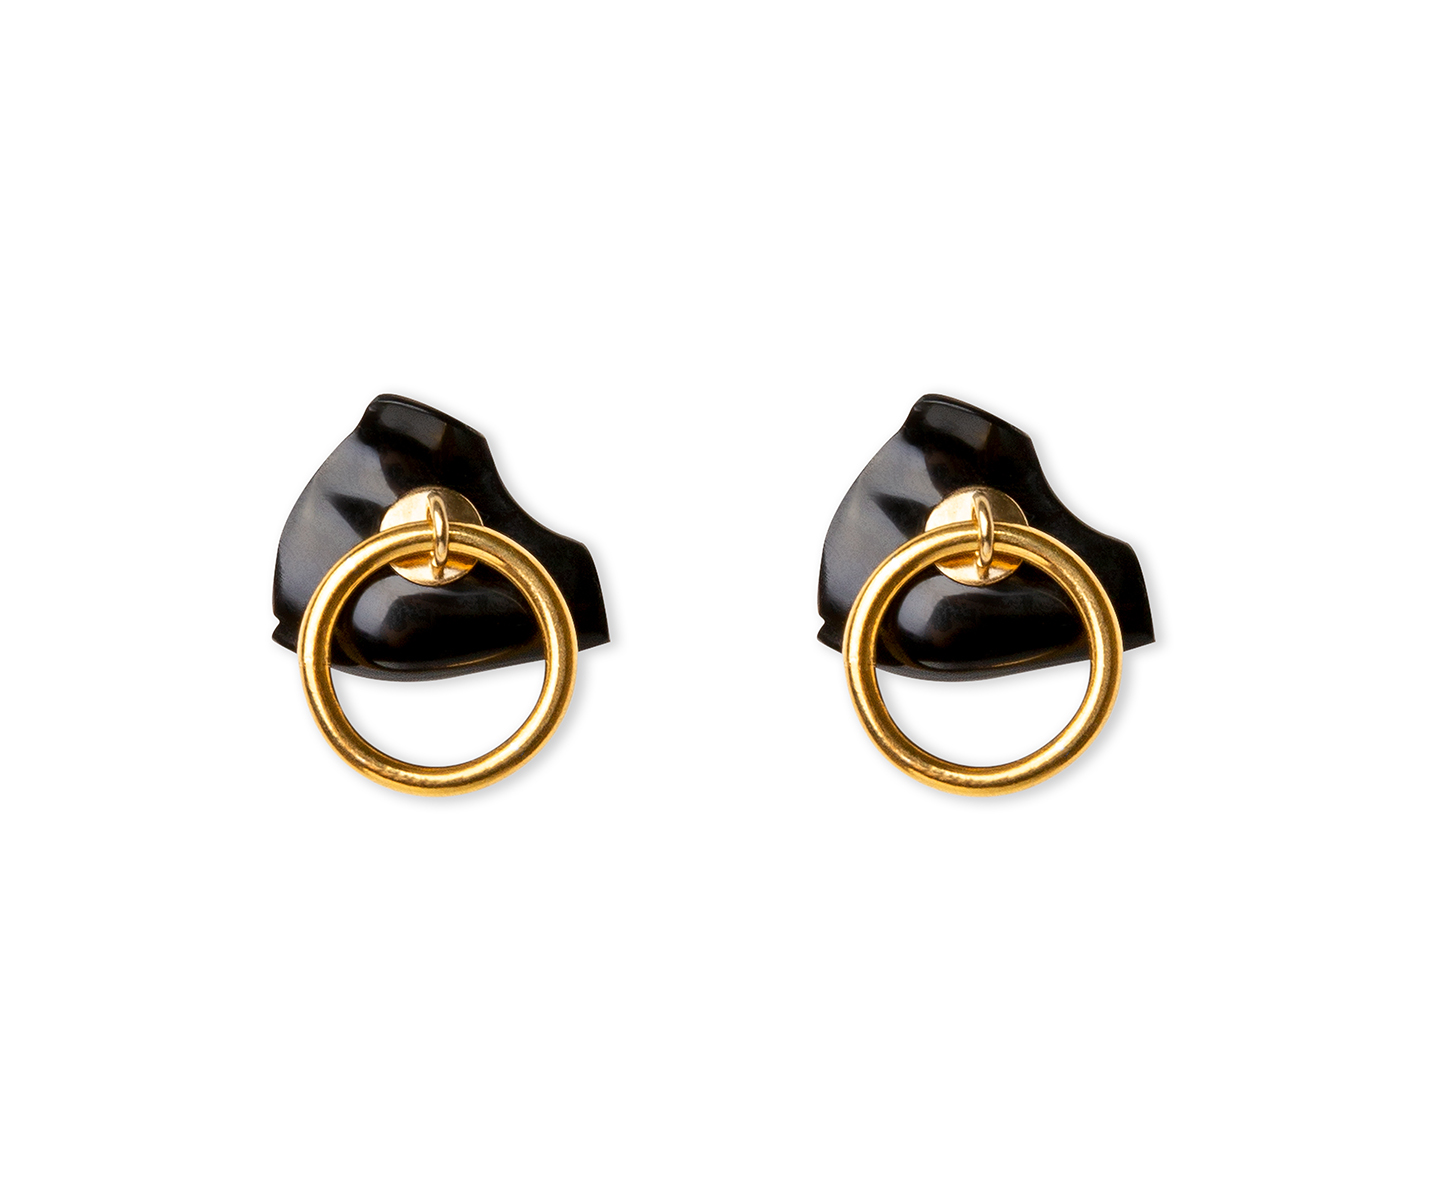 Gold earring with hoop and false onyx dilation